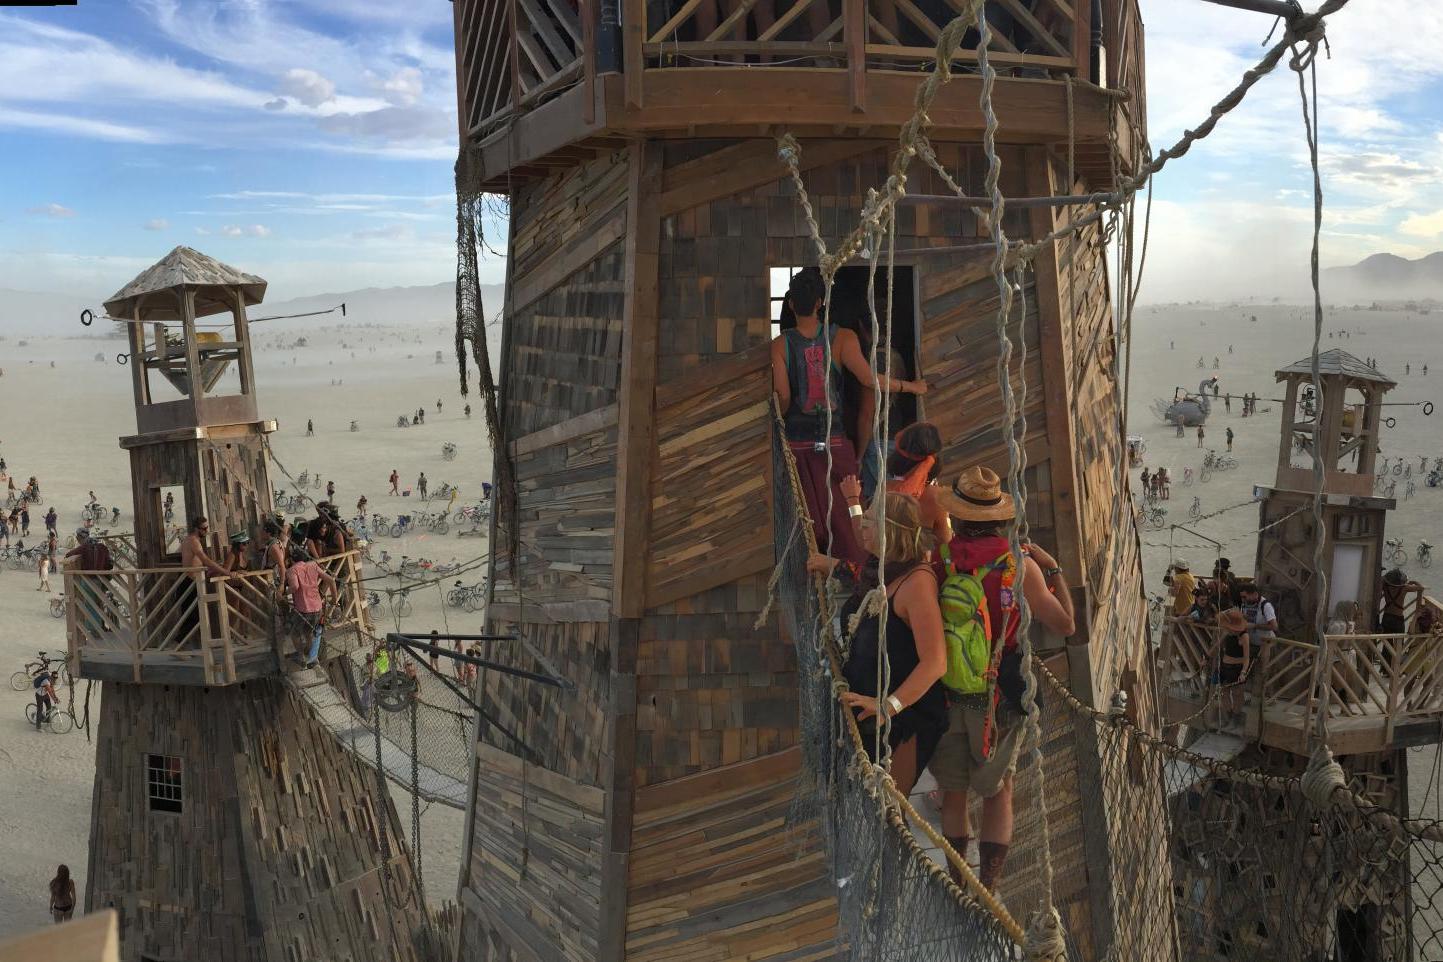 Burning Man is touted as a way for people to find themselves